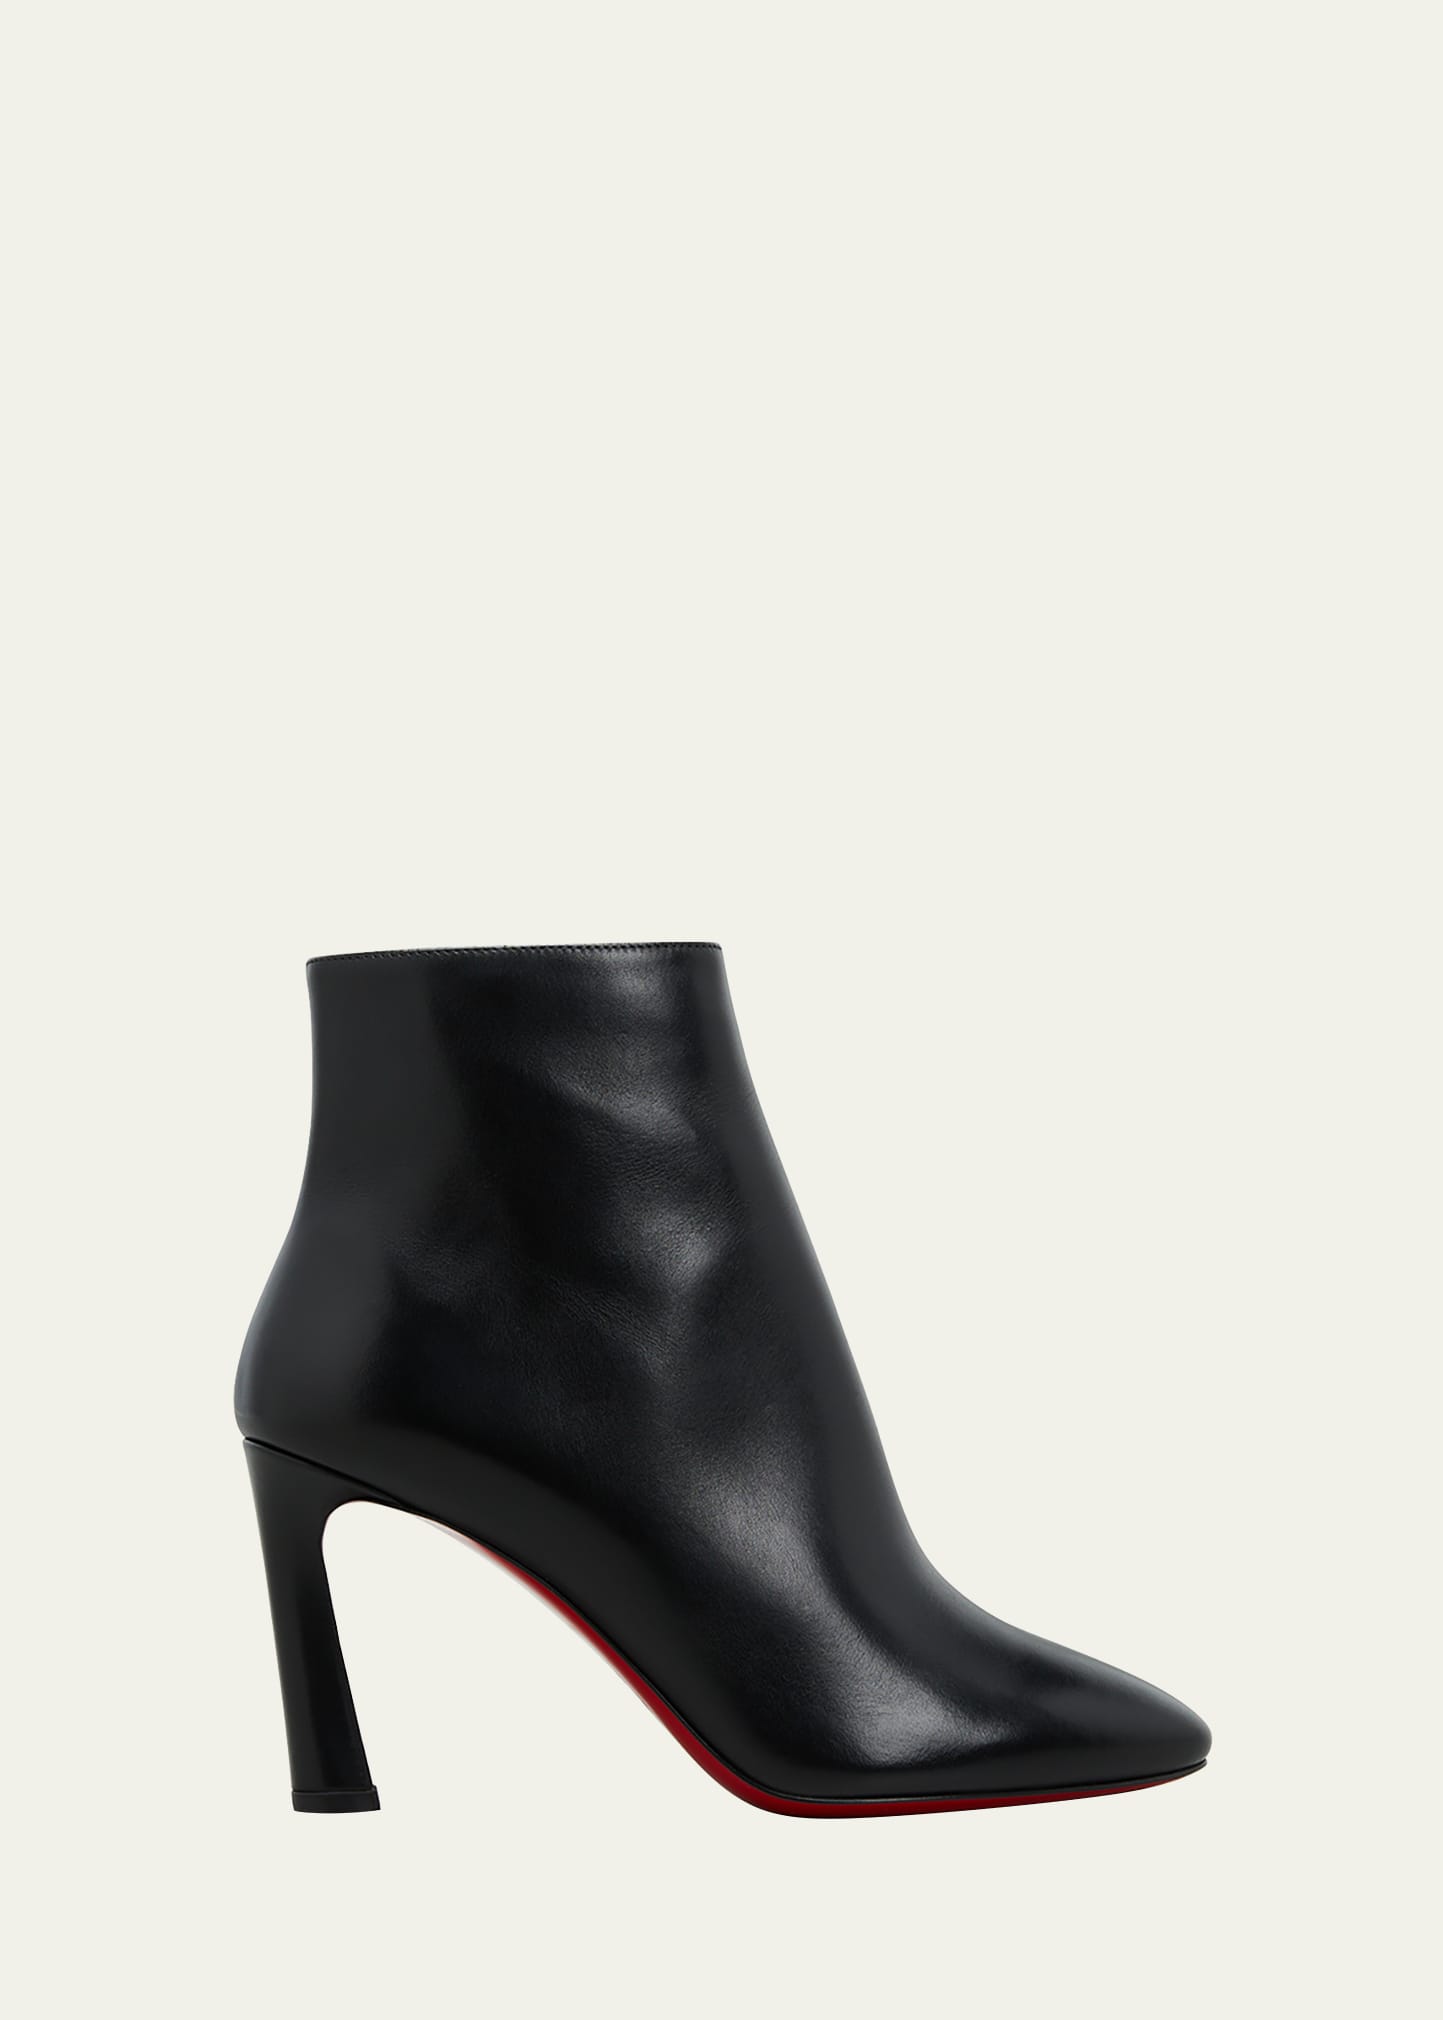 Christian Louboutin So Eleonor Leather Red Sole Booties